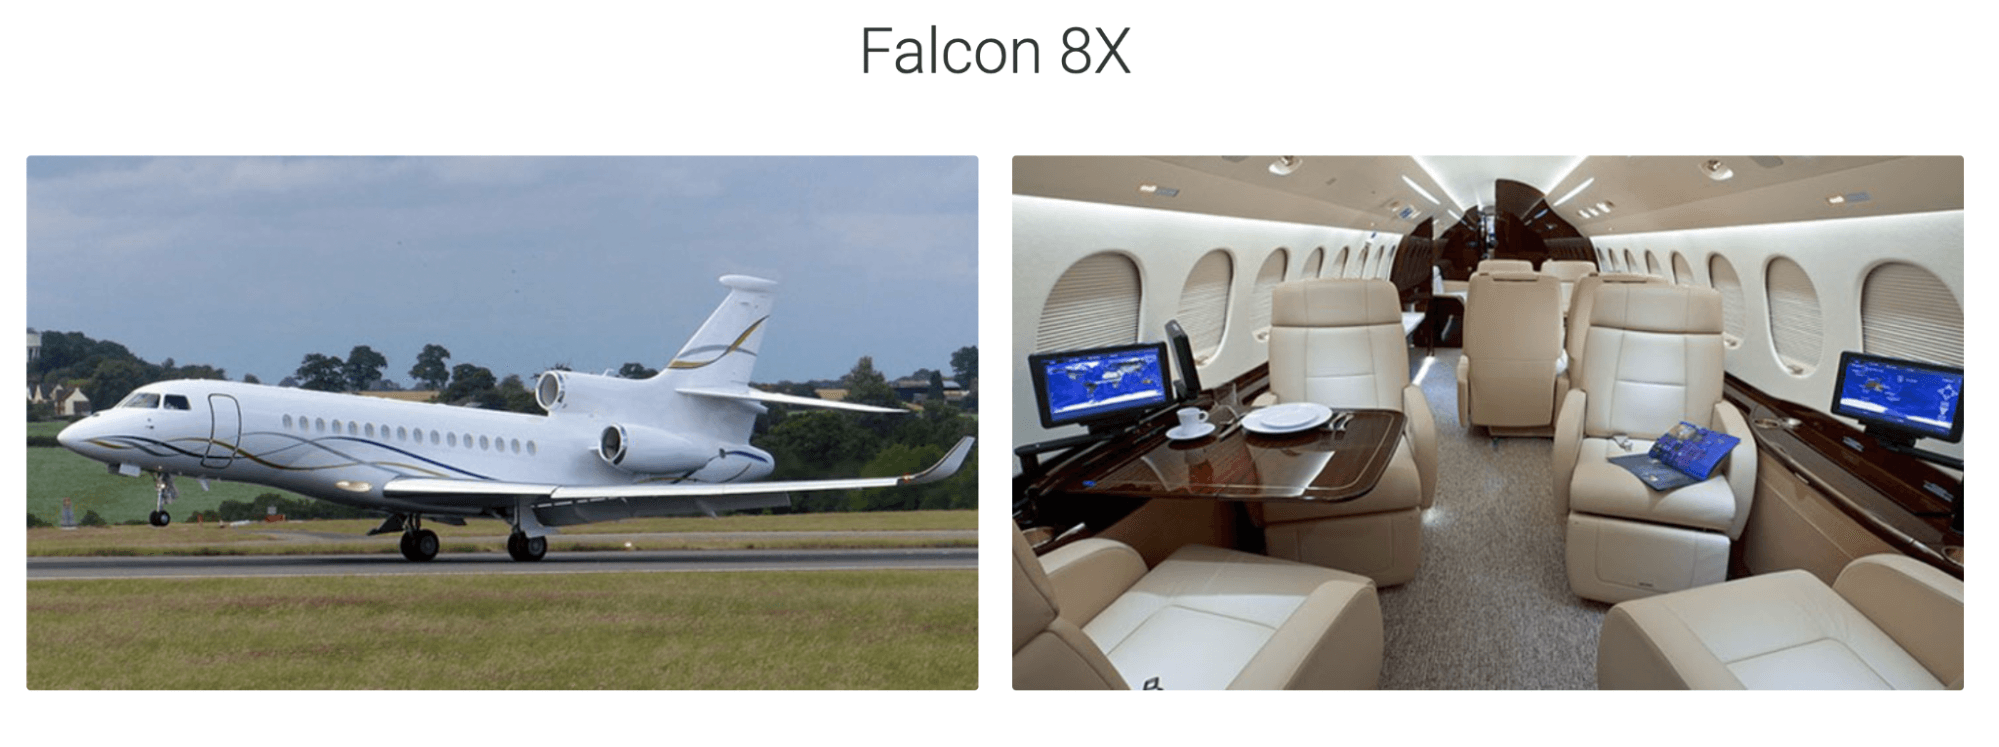 An exterior and interior picture of the business jet Falcon 8X.